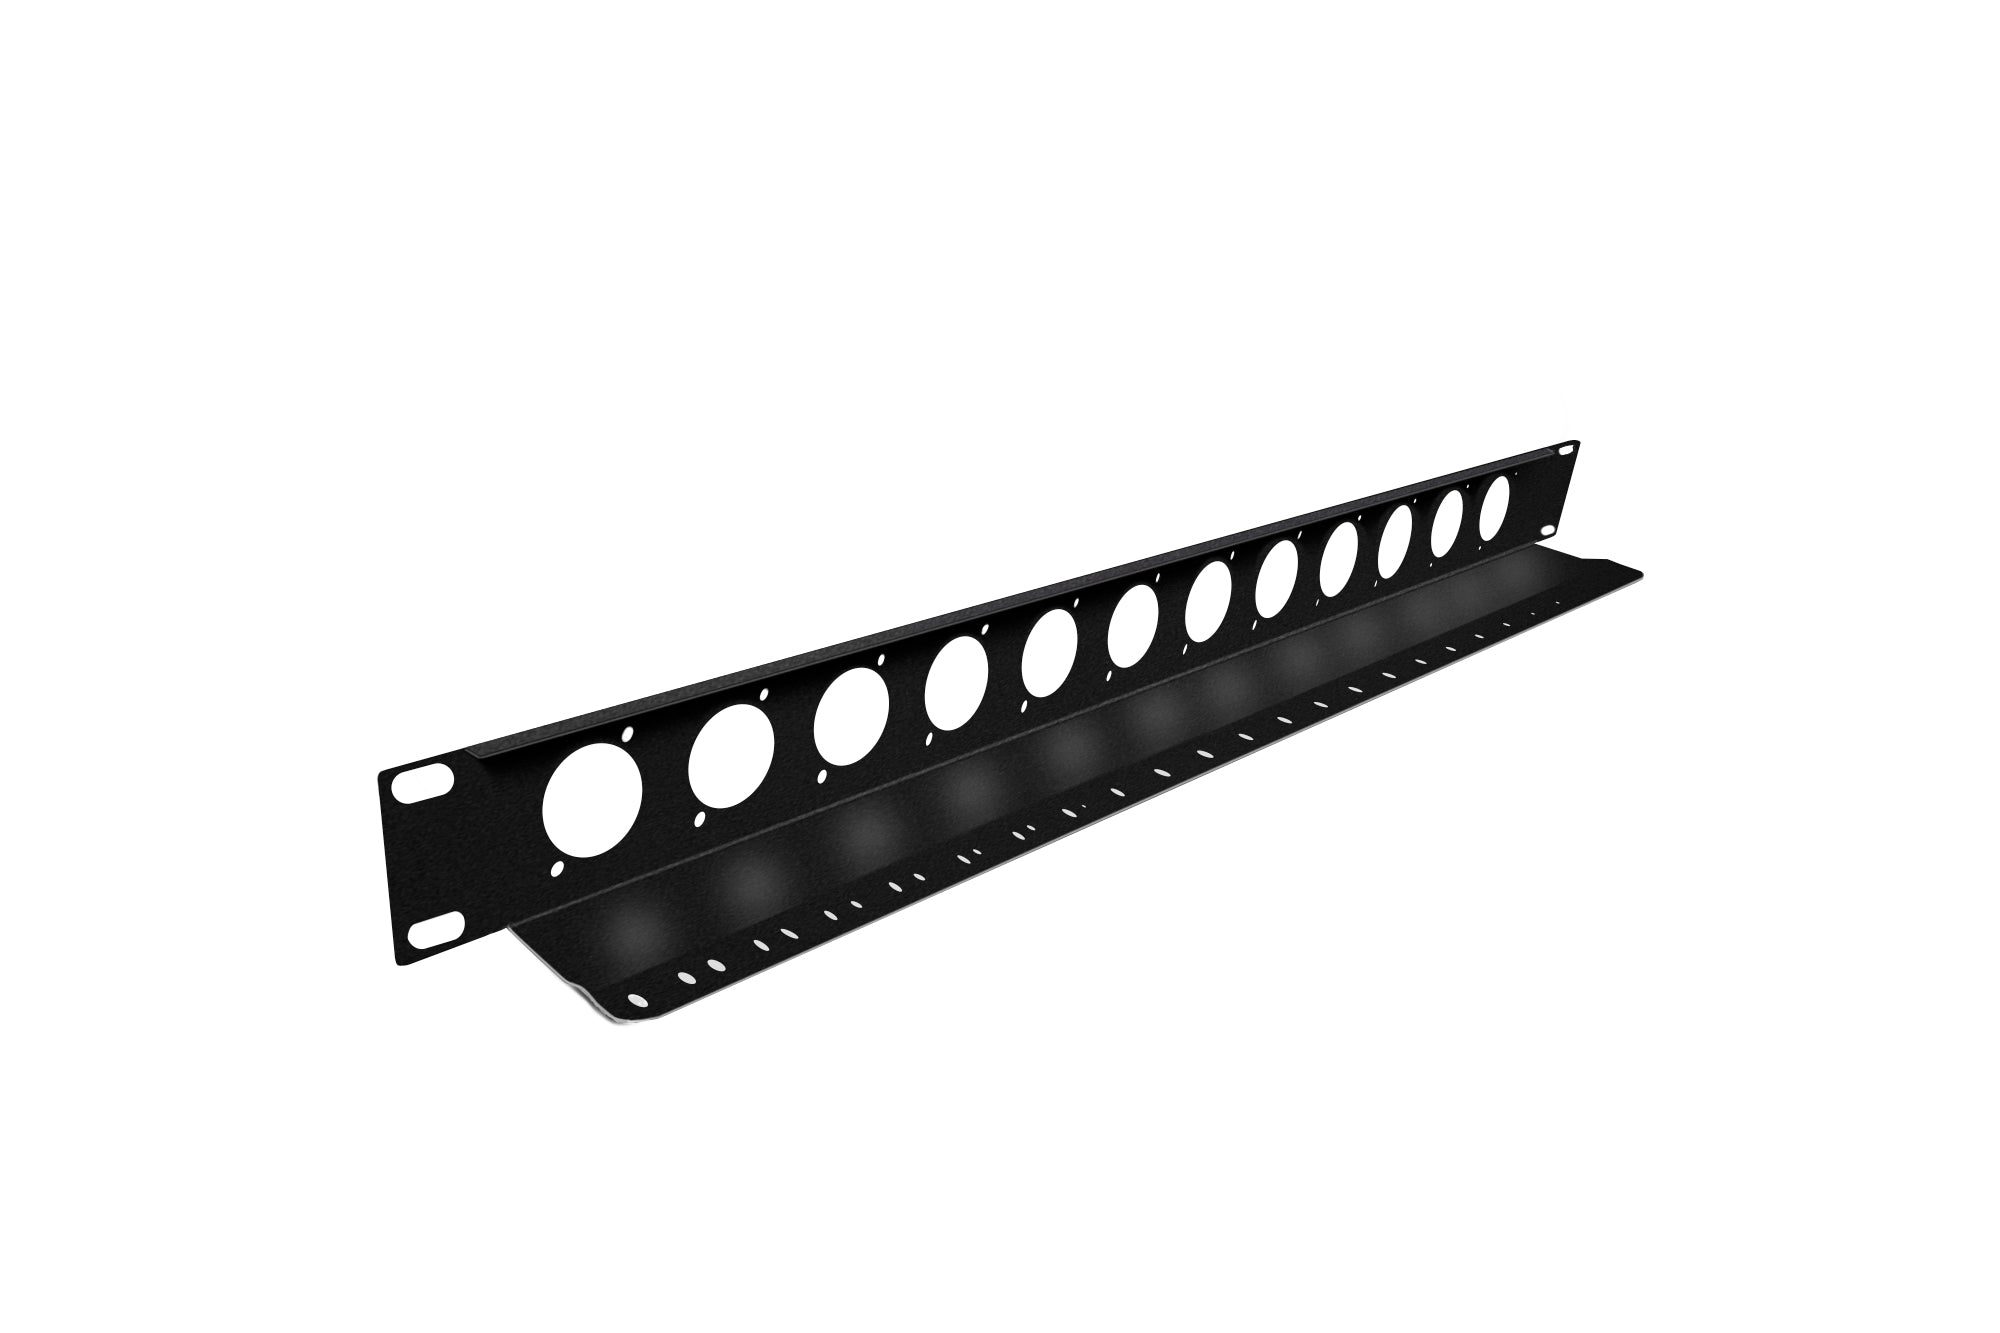 Elite Core TSP1U-12D 1 Space Rack Panel - 12 D Punches and Tie Down